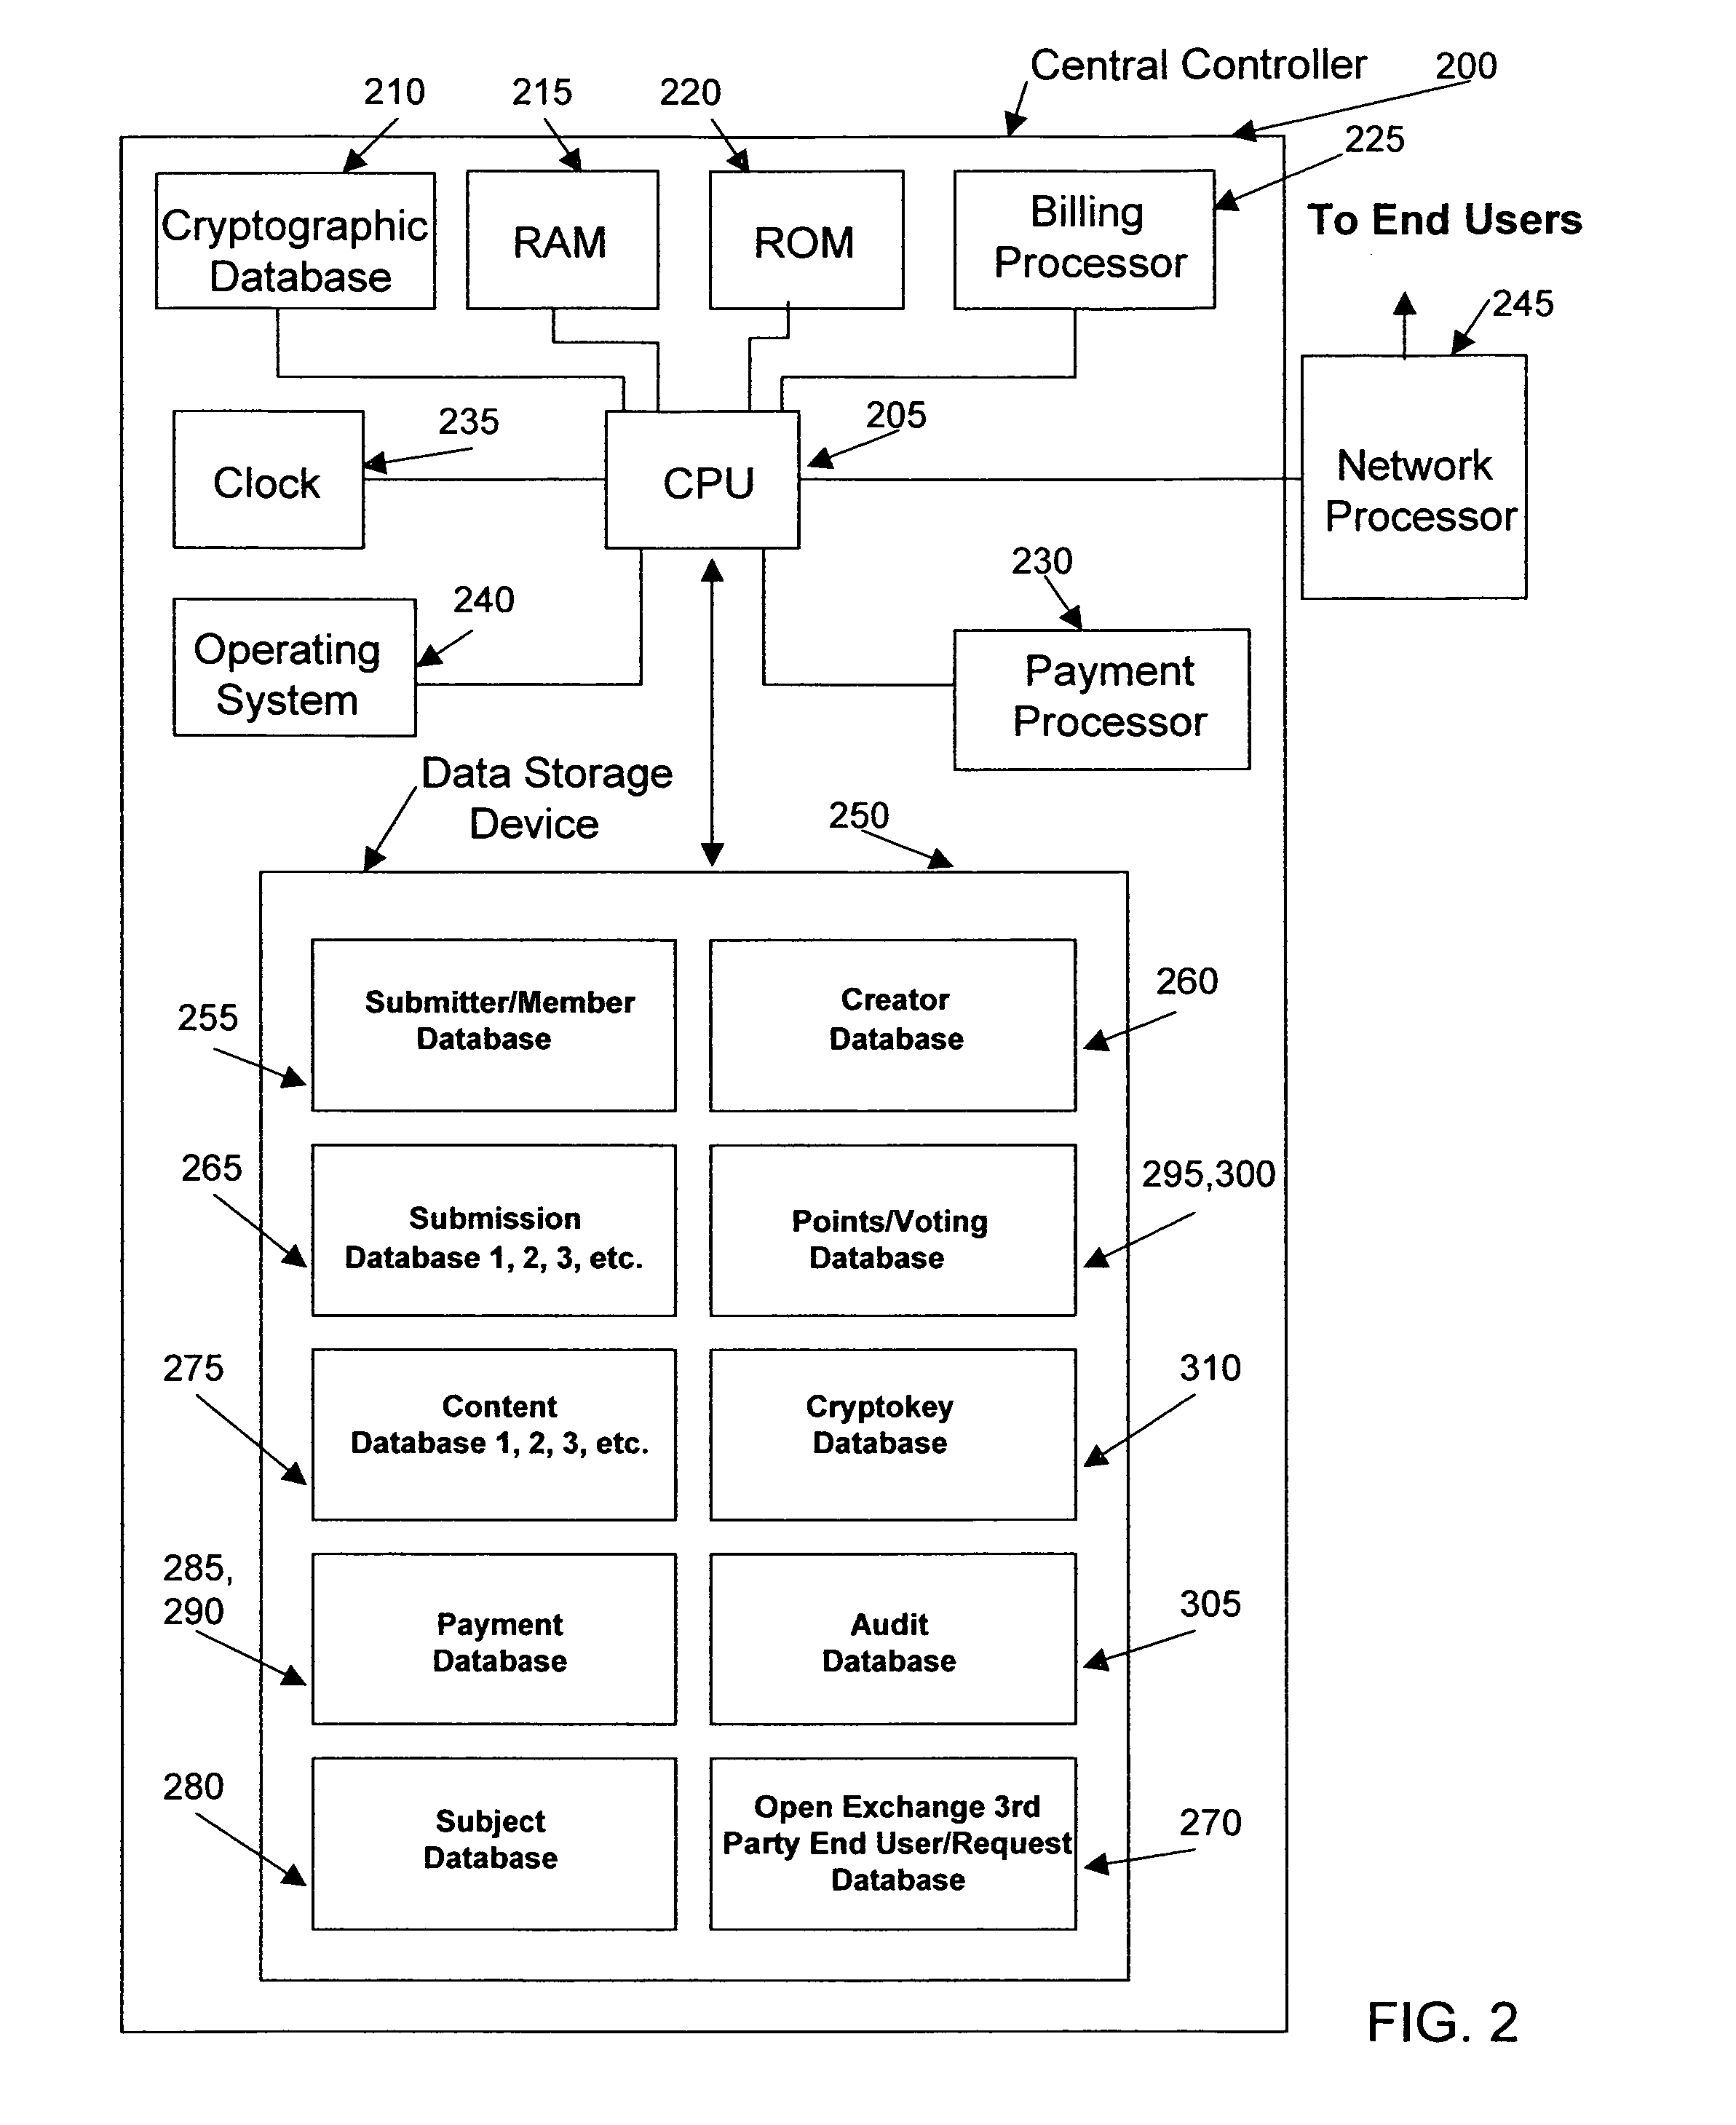 Process for creating media content based upon submissions received on an electronic multi-media exchange